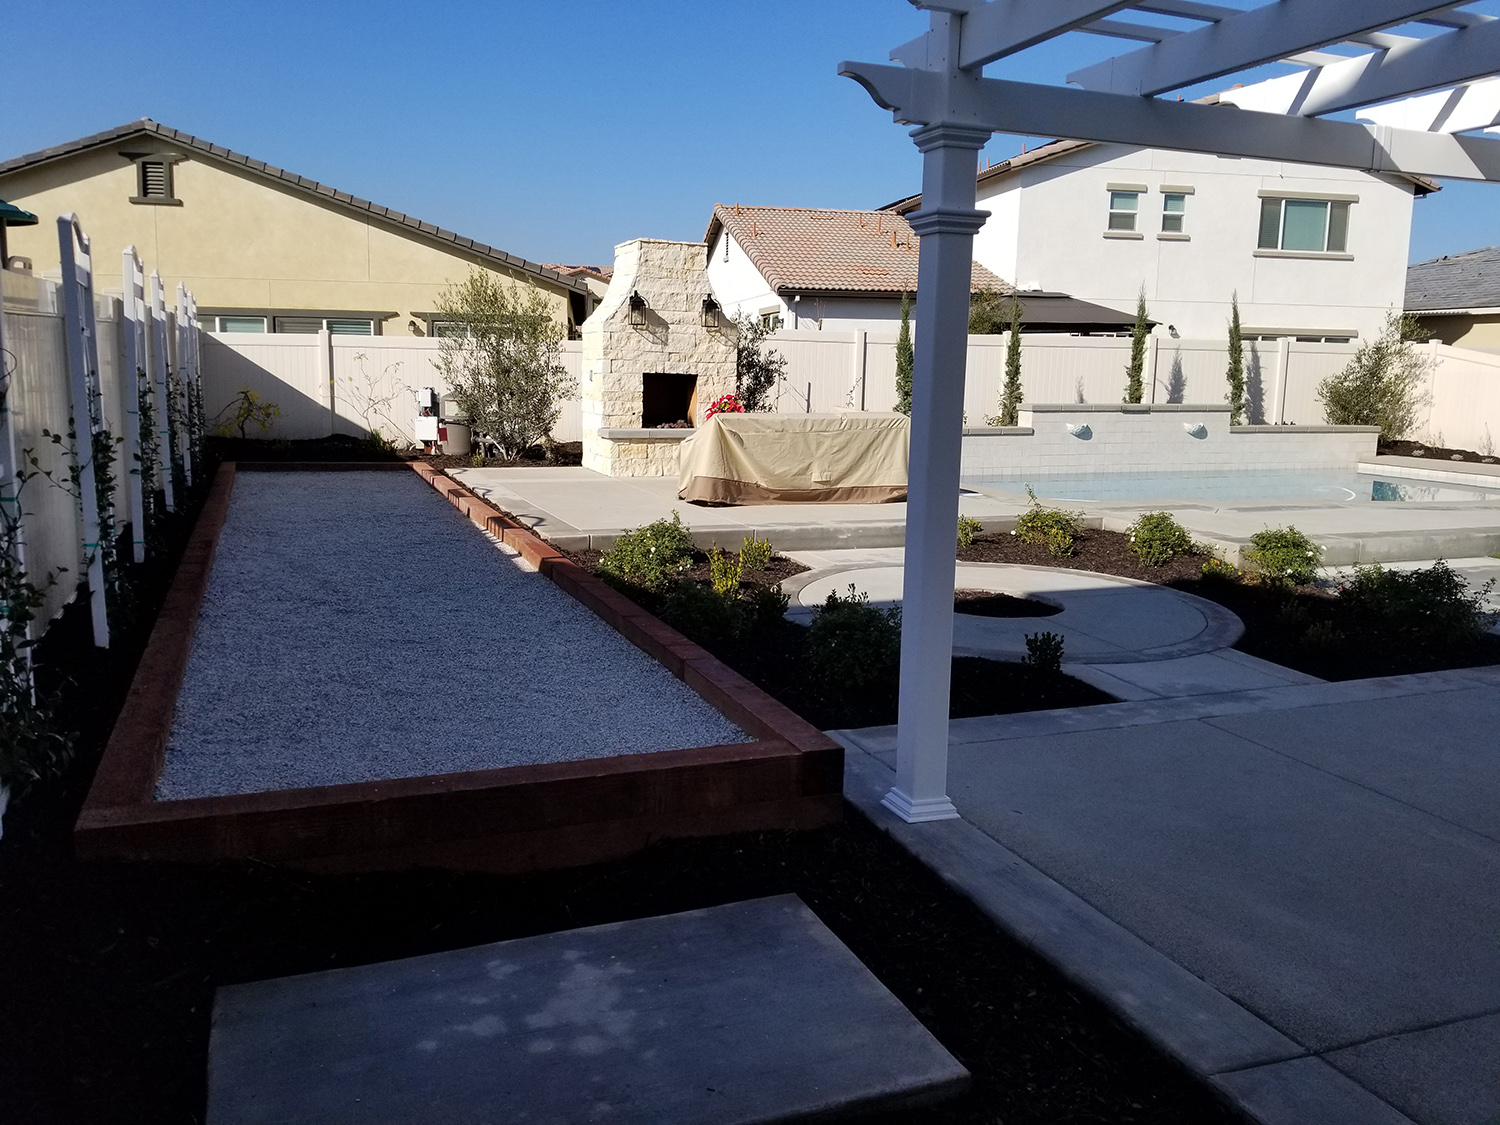 Bocce ball court with fireplace and concrete